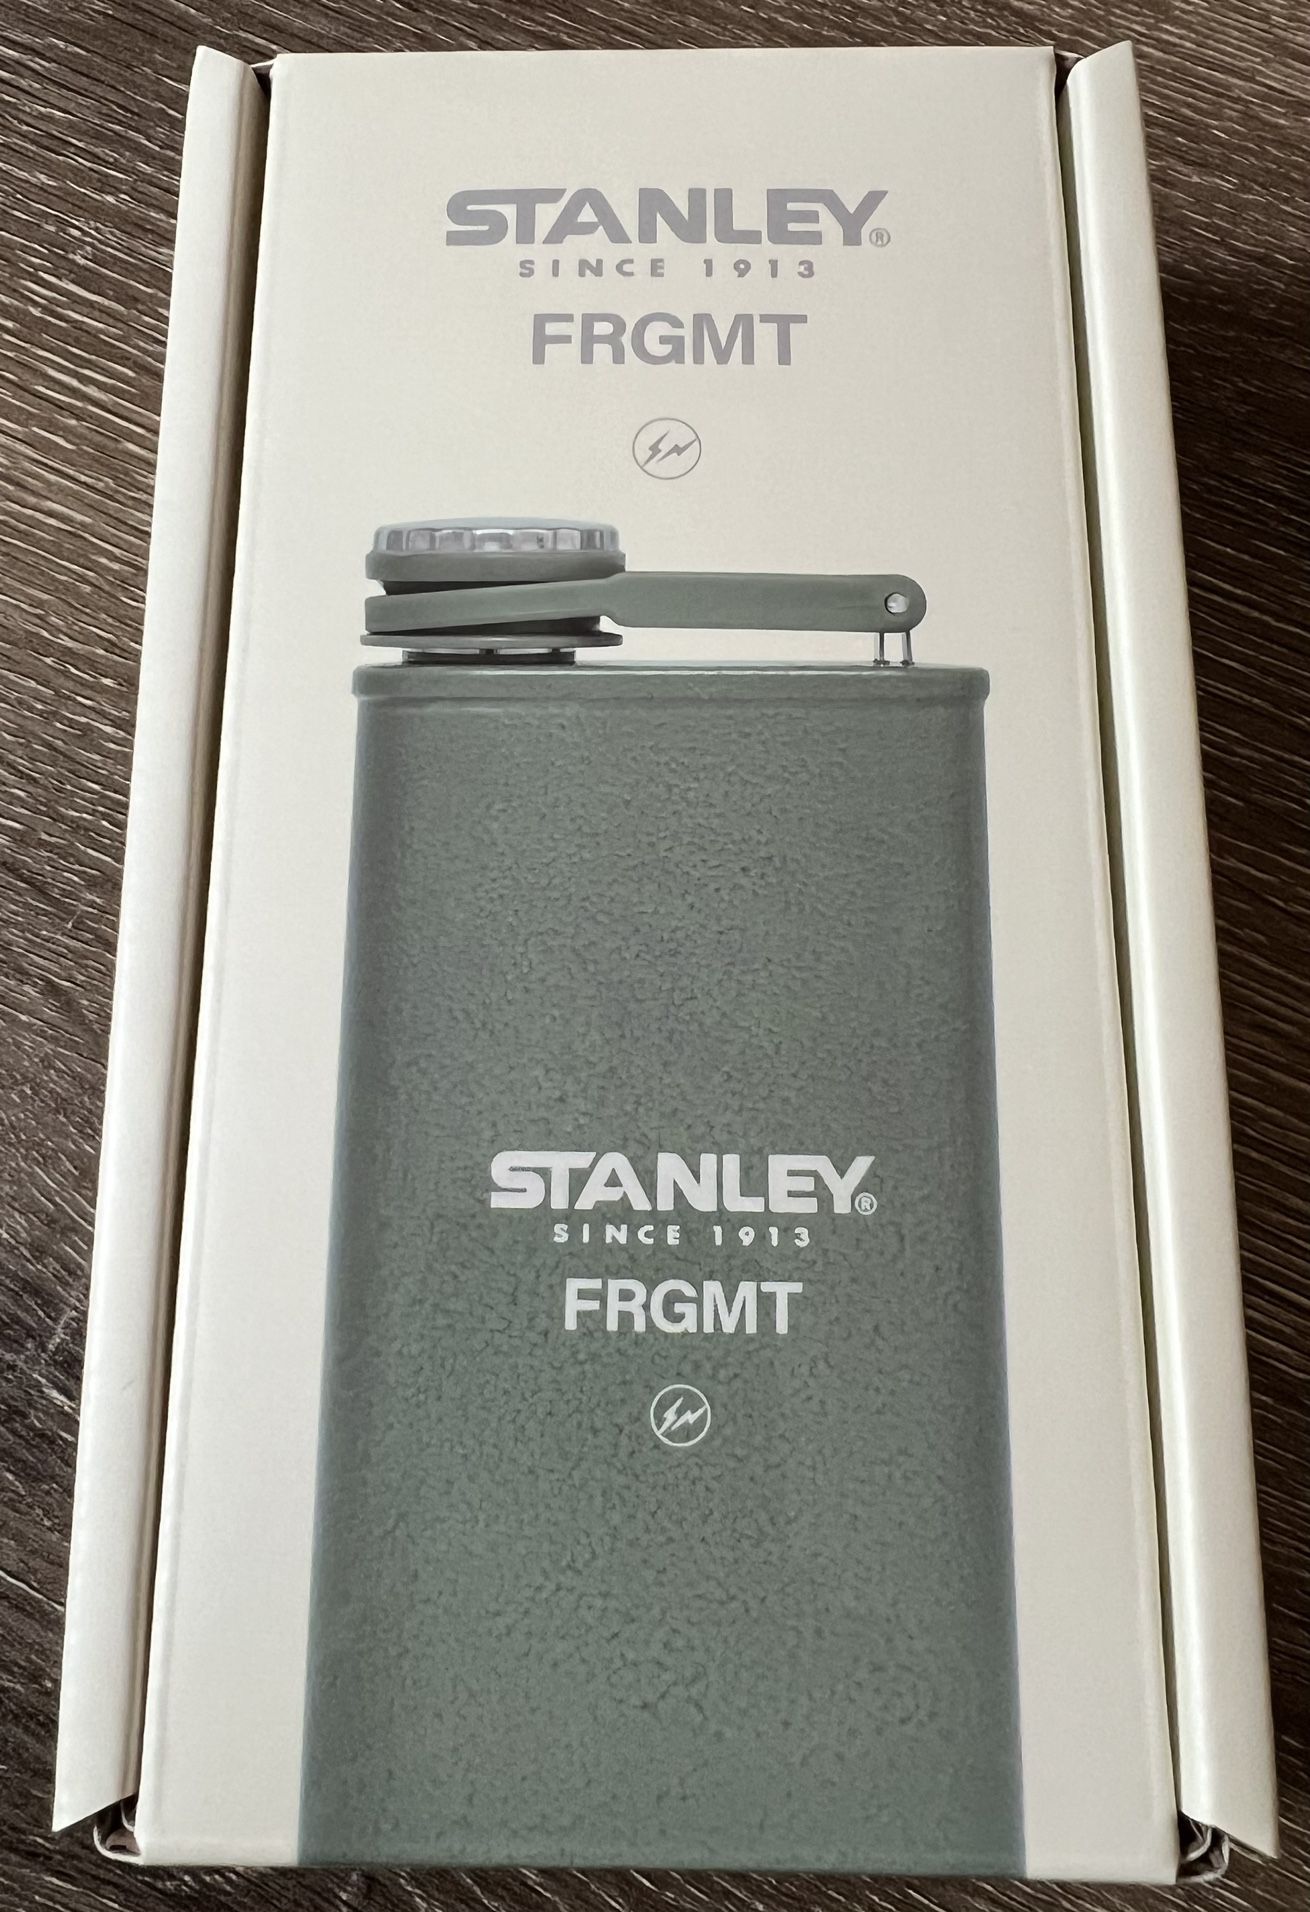 The Stanley x FRGMT Classic Flask | 8 OZ Flask (NEW IN BOX)